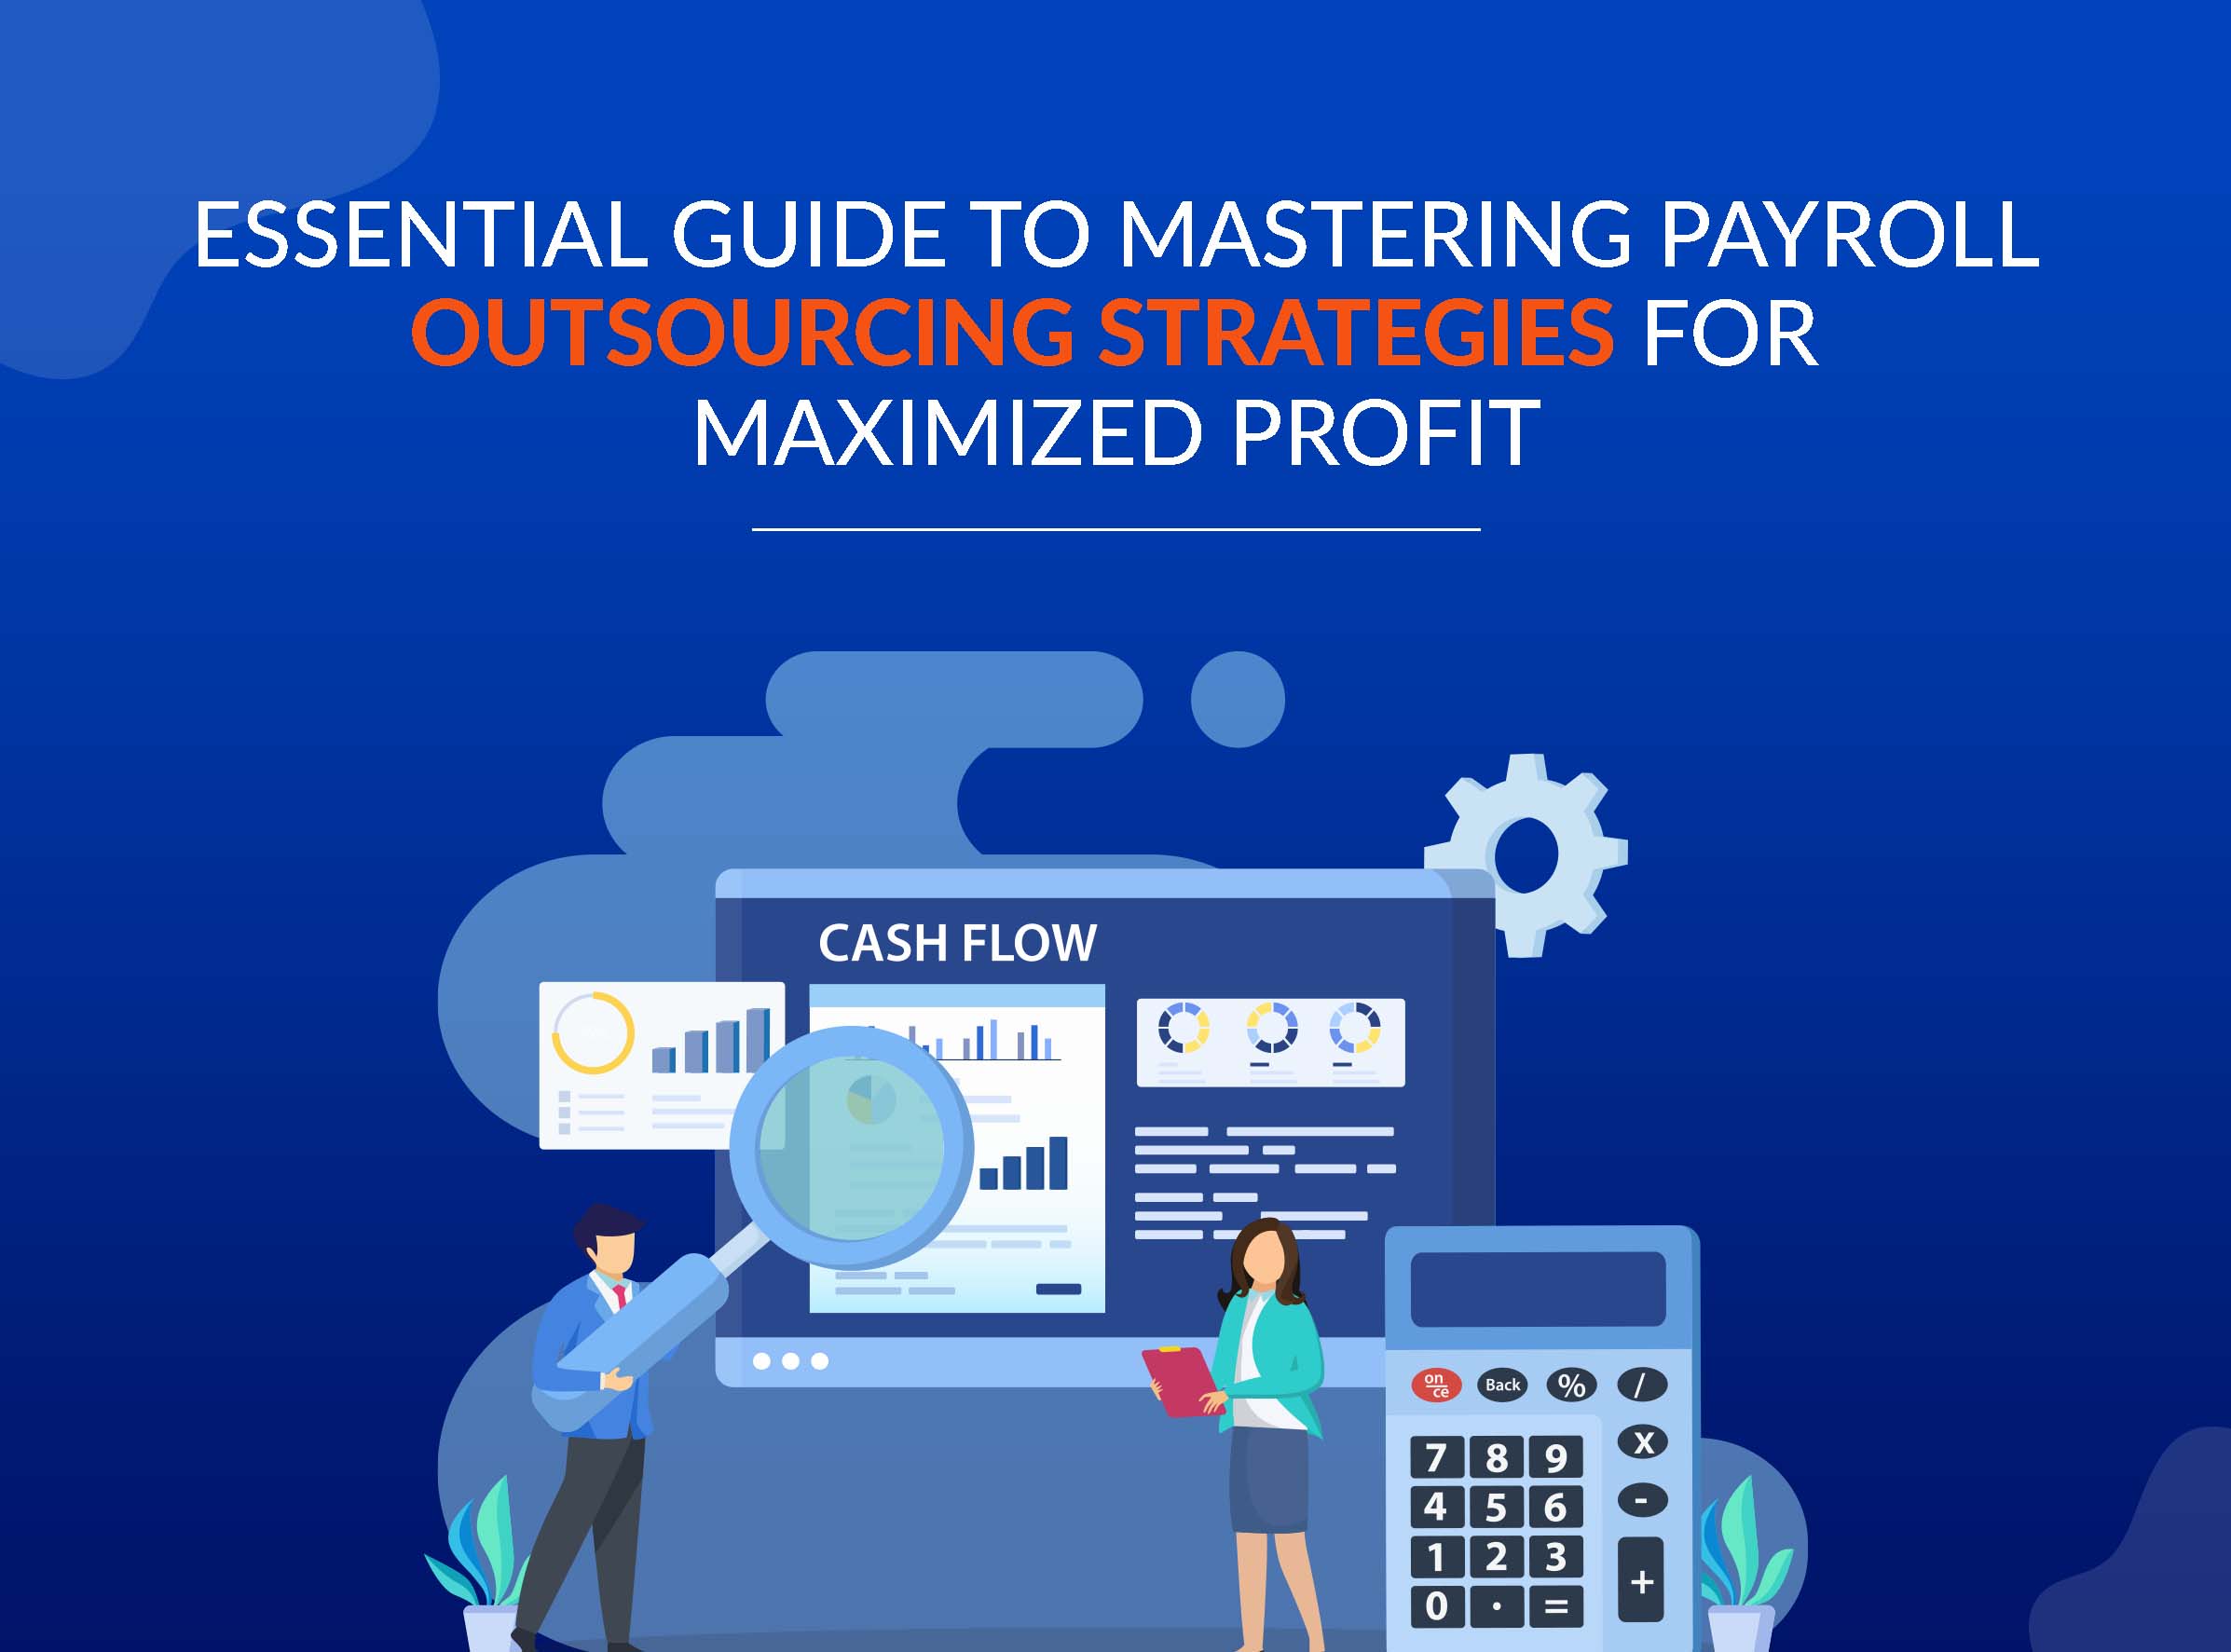 Essential Guide to Mastering Payroll Outsourcing Strategies for Maximized Profit